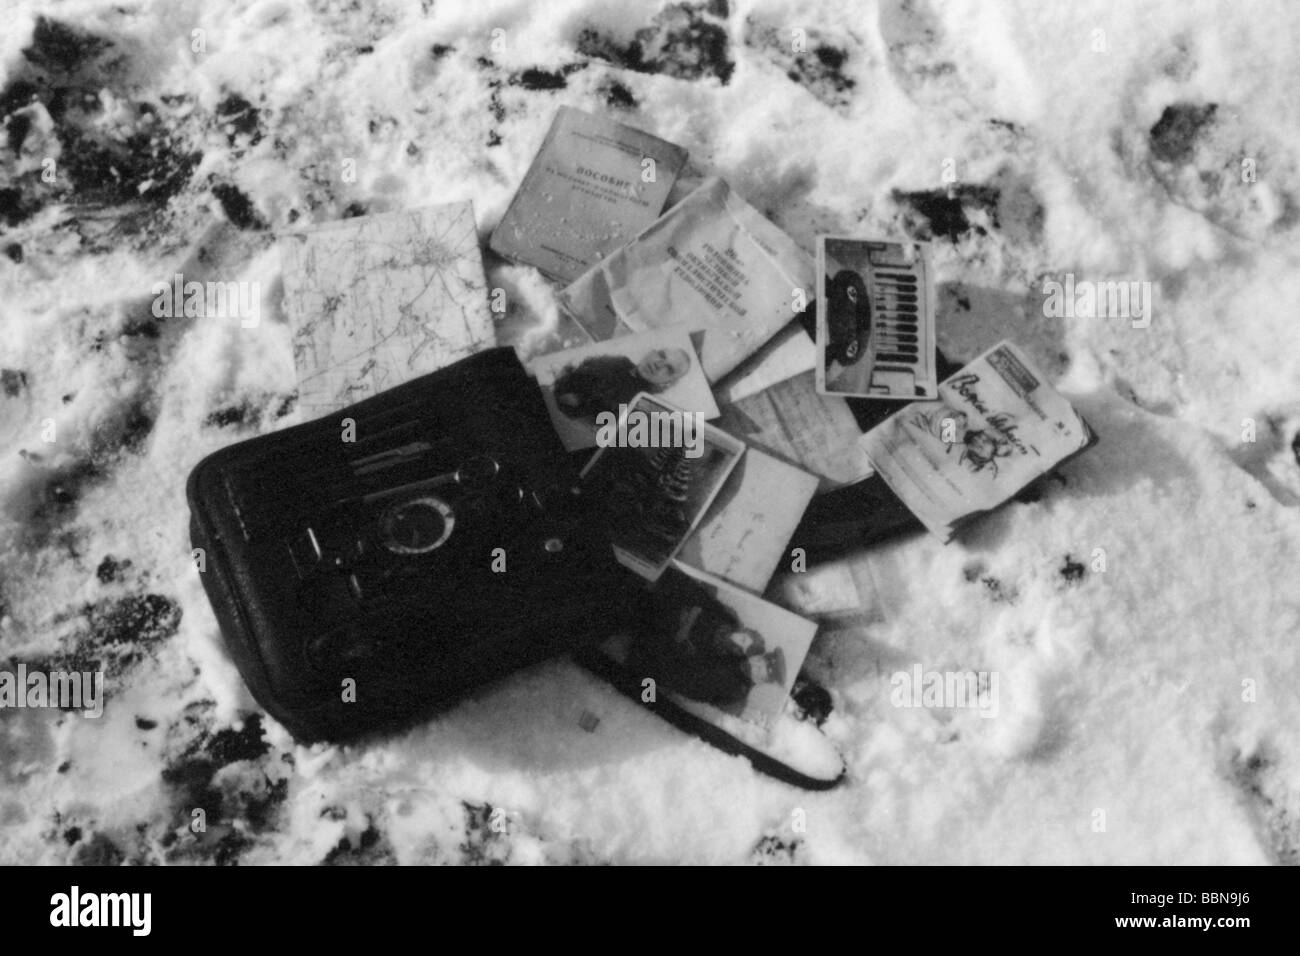 events, Second World War / WWII, Russia 1944 / 1945, German counterattack near Britskoye, Ukraine, late January 1944, belongings of a fallen or captured Soviet officer, utensils, Eastern Front, historic, historical, winter, snow, USSR, Soviet Union, pictures, photos, bag, equipment, compass, pair of compasses, map, scissors, 20th century, historic, historical, Red Army, losses, 1940s, Stock Photo